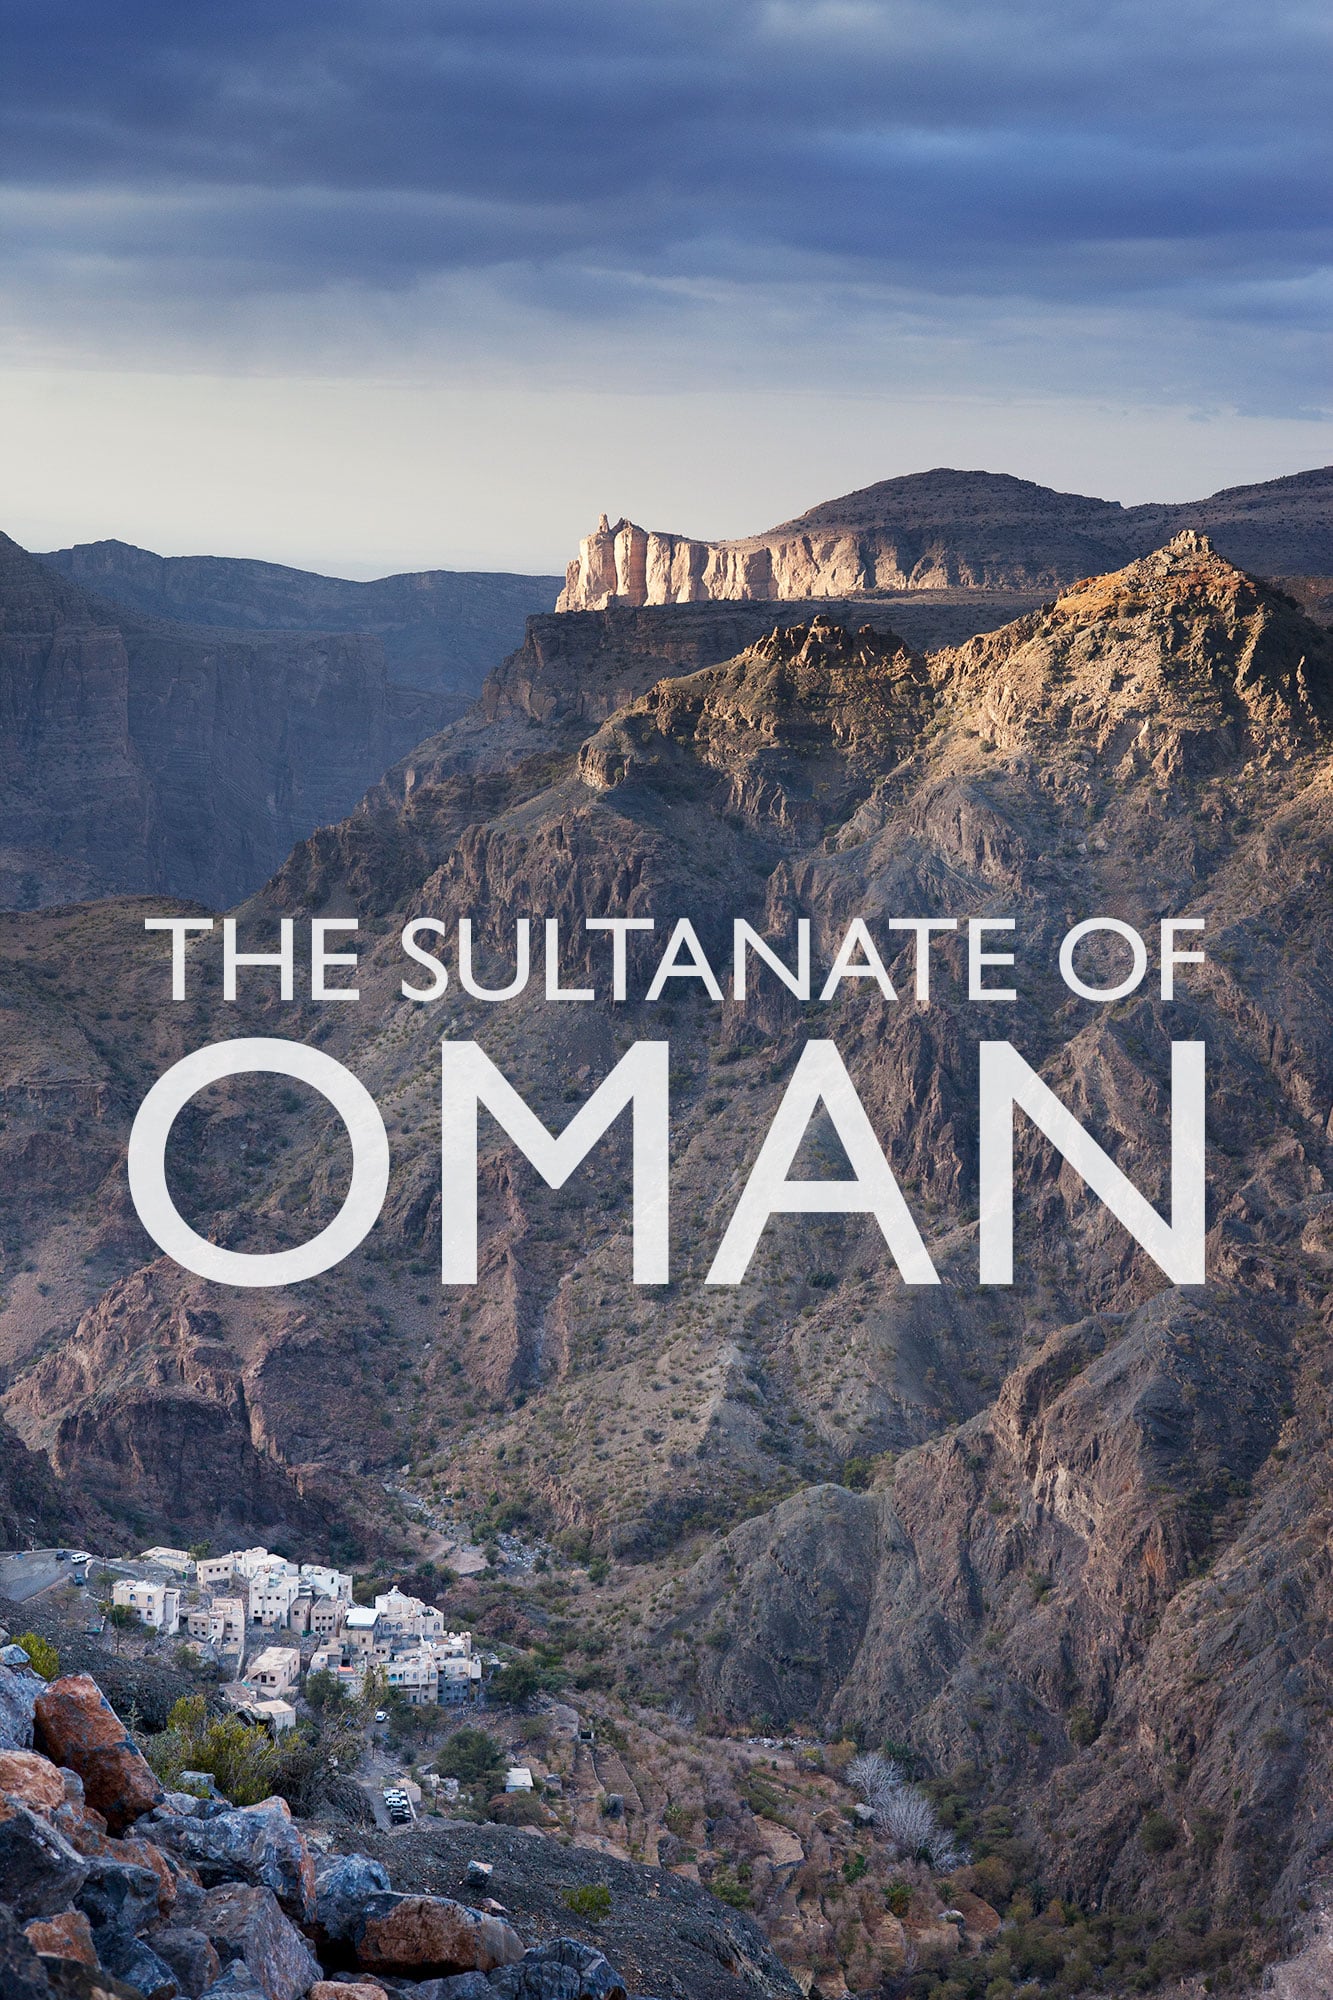 THE SULTANATE OF OMAN